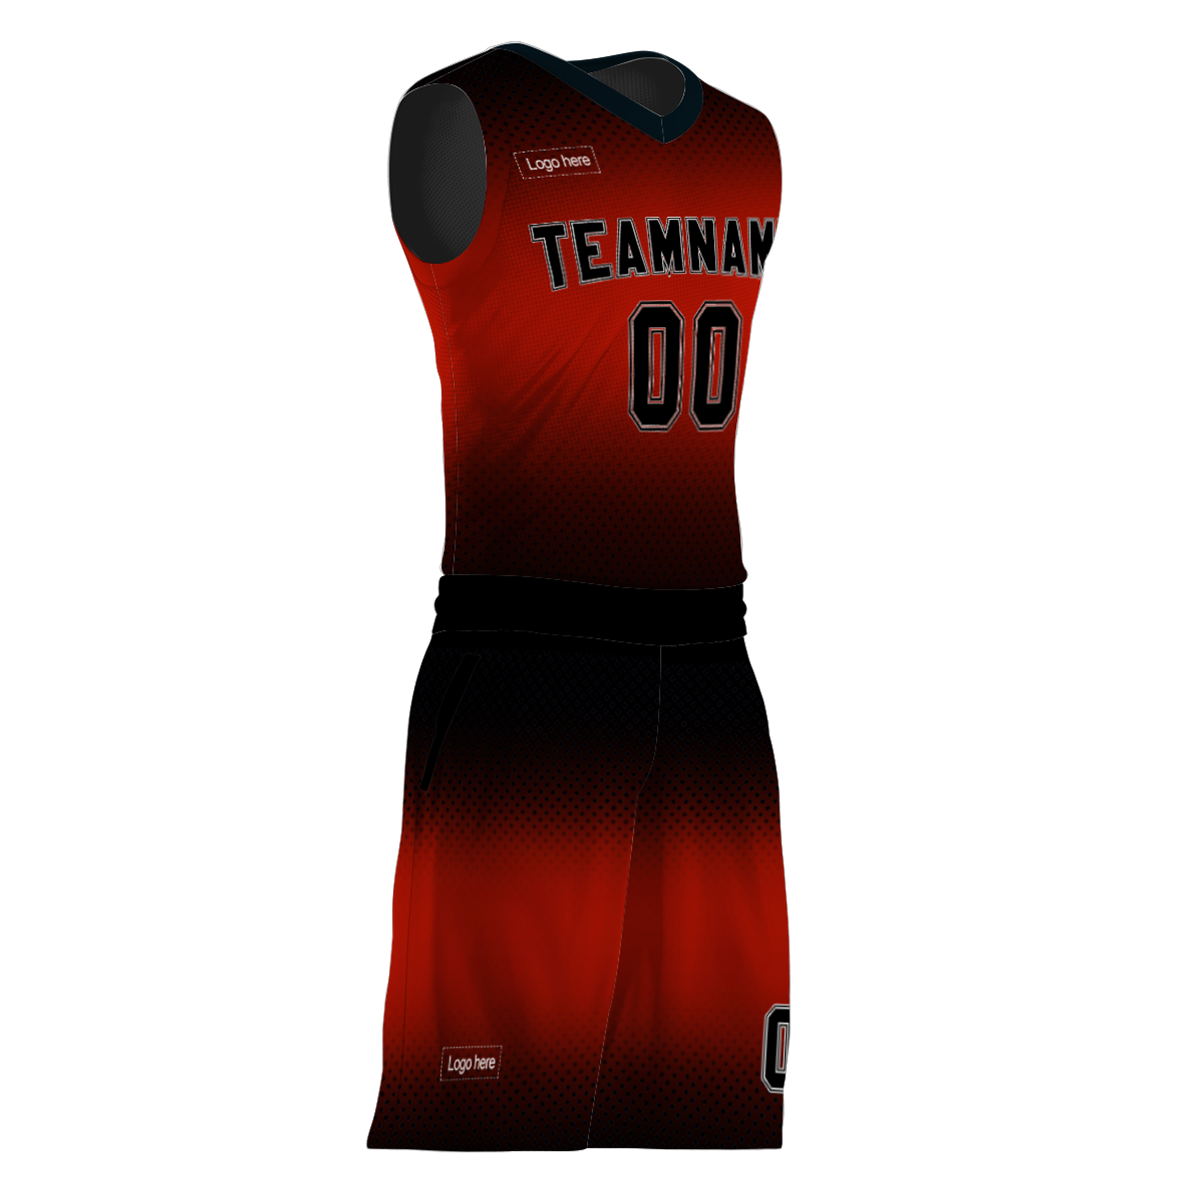 Customize Basketball Team Wear Suits Print on Demand Sublimation Breathable Basketball Jersey Uniforms